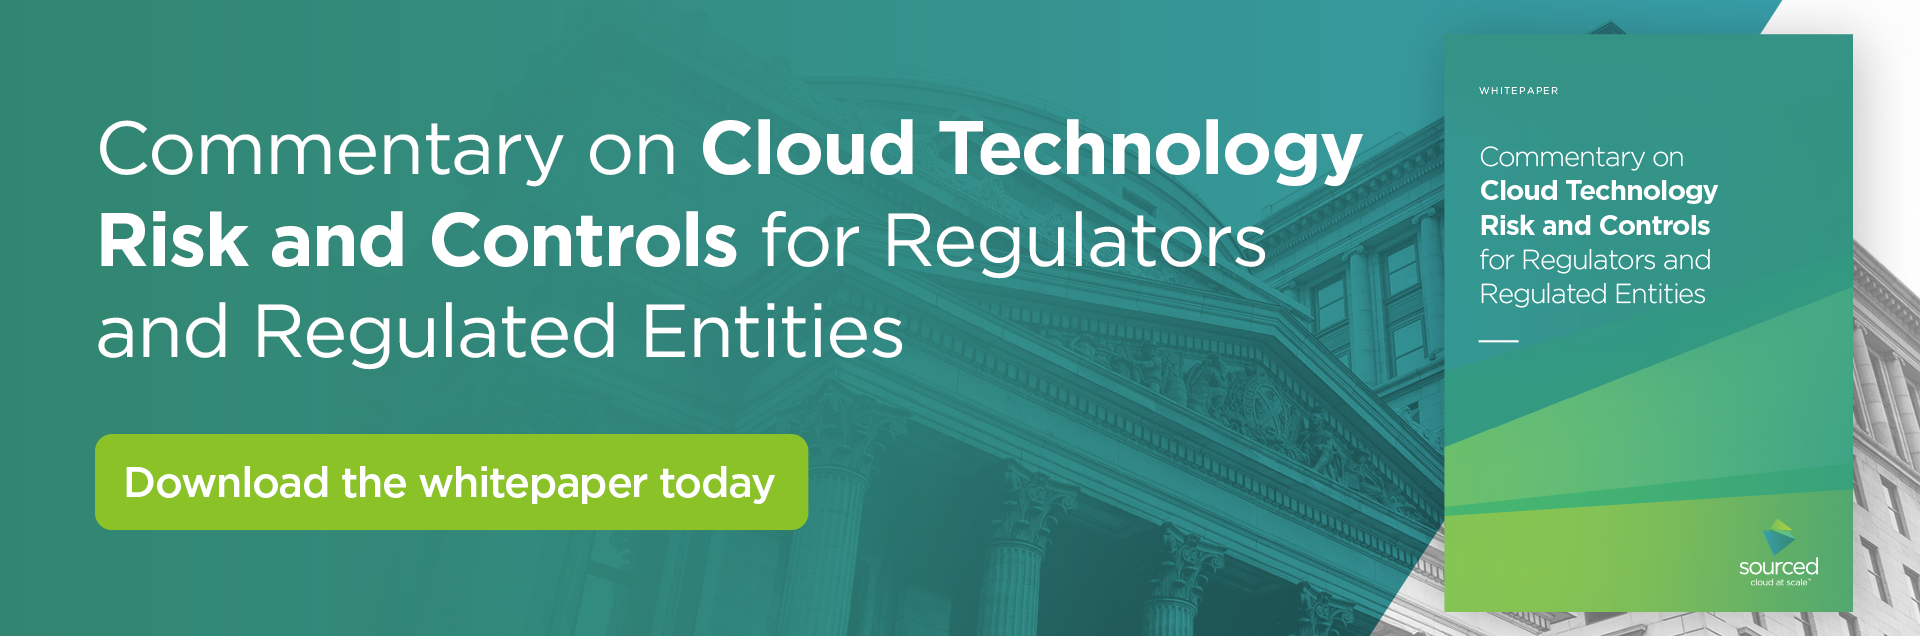 Commentary on Cloud Technology Risk and Controls for Regulators and Regulated Entities